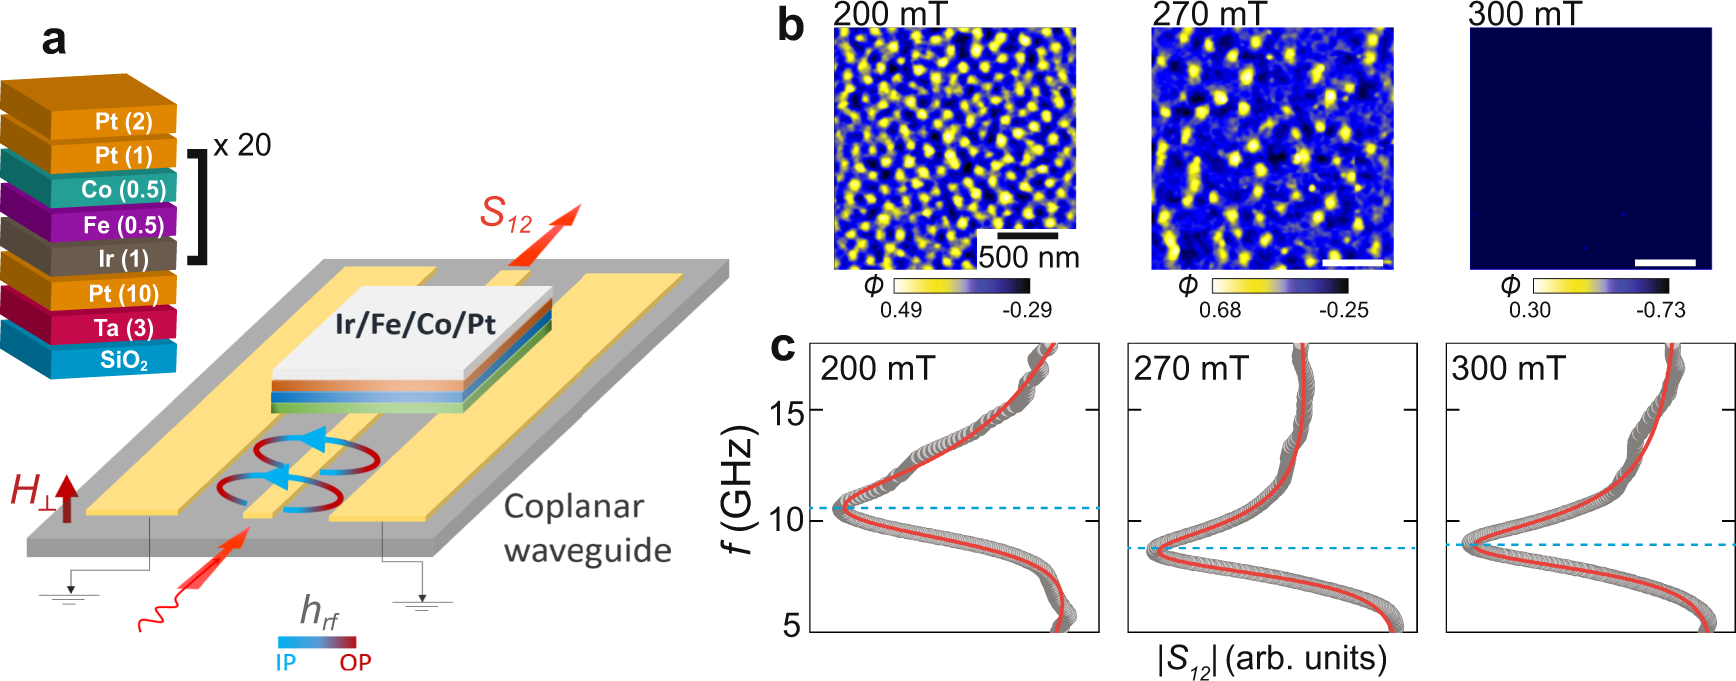 Microwave resonances of magnetic skyrmions in thin film multilayers |  Nature Communications